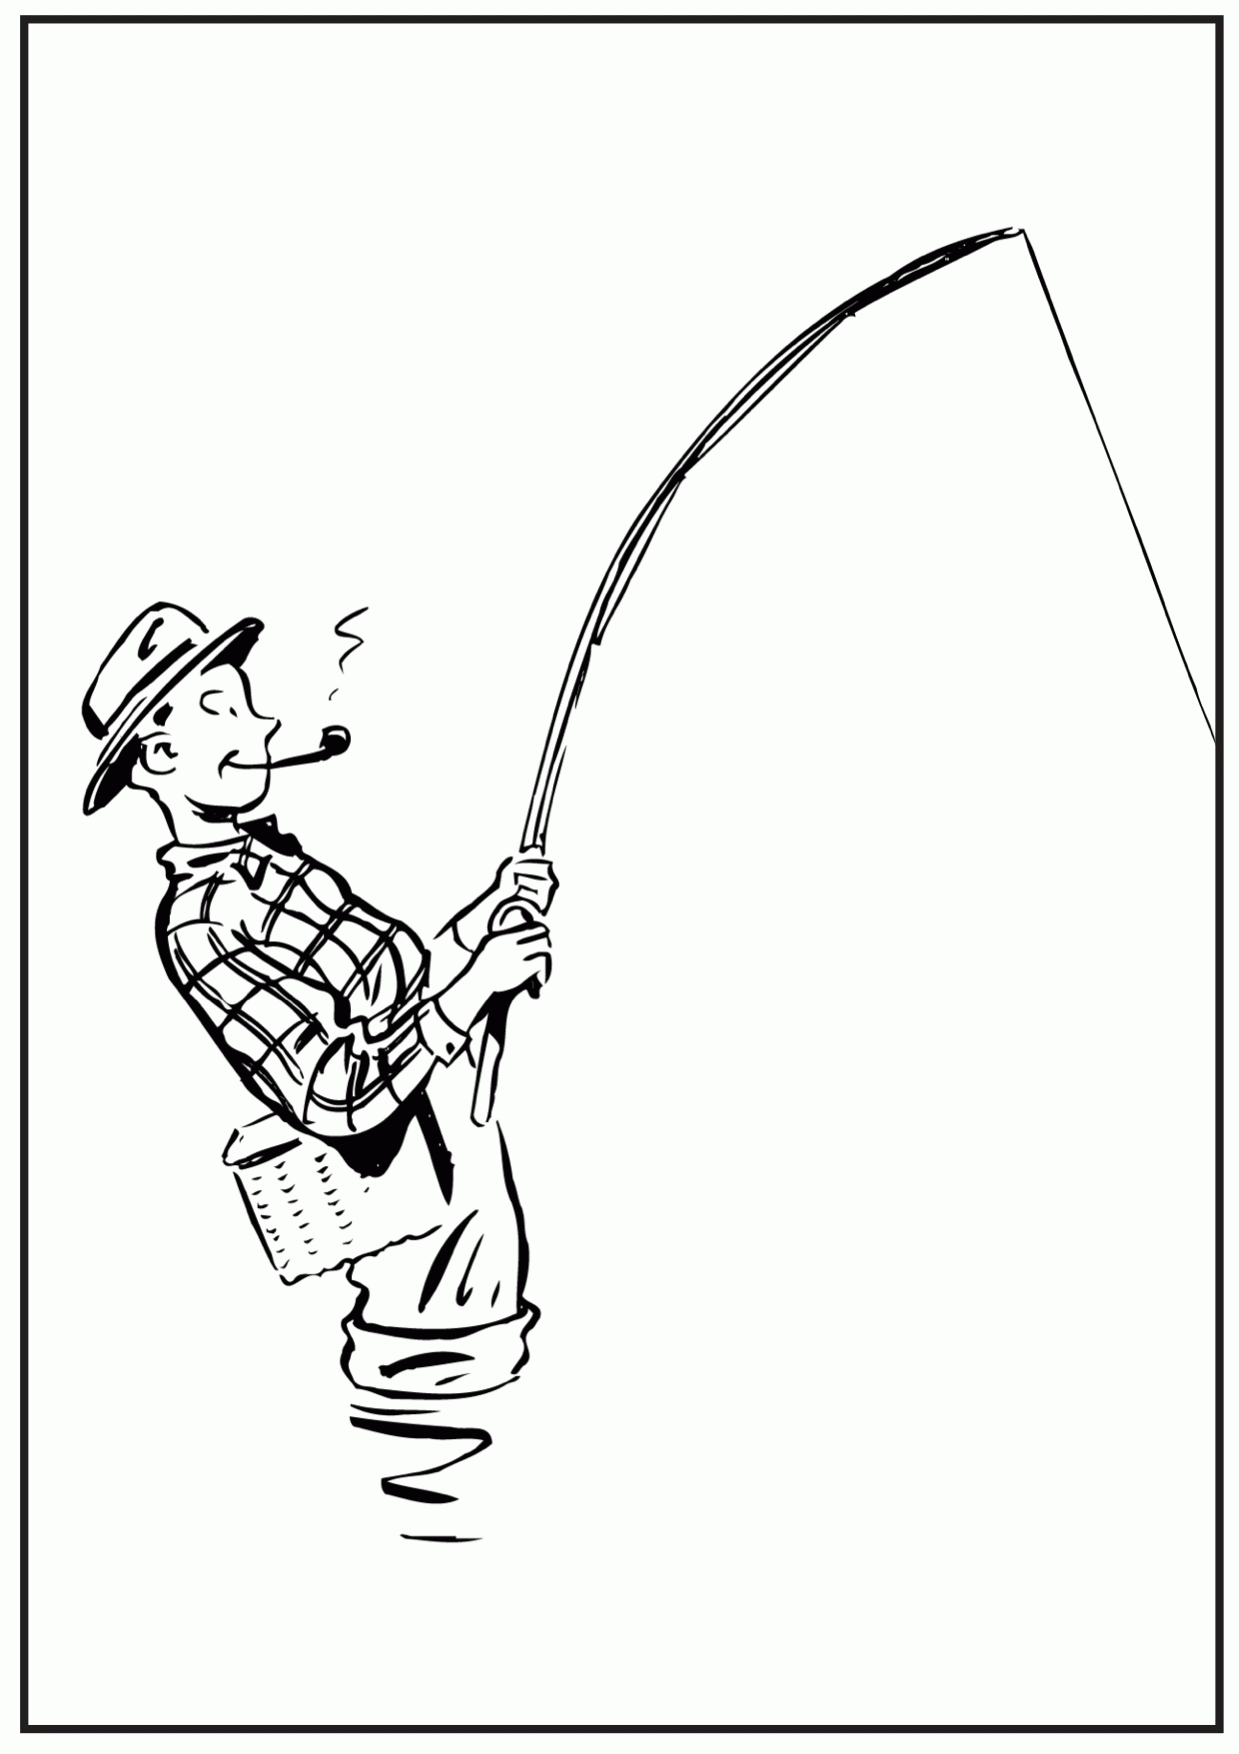 Man Fishing Coloring Pages Boy Fishing Coloring Page ~ Coloring Page